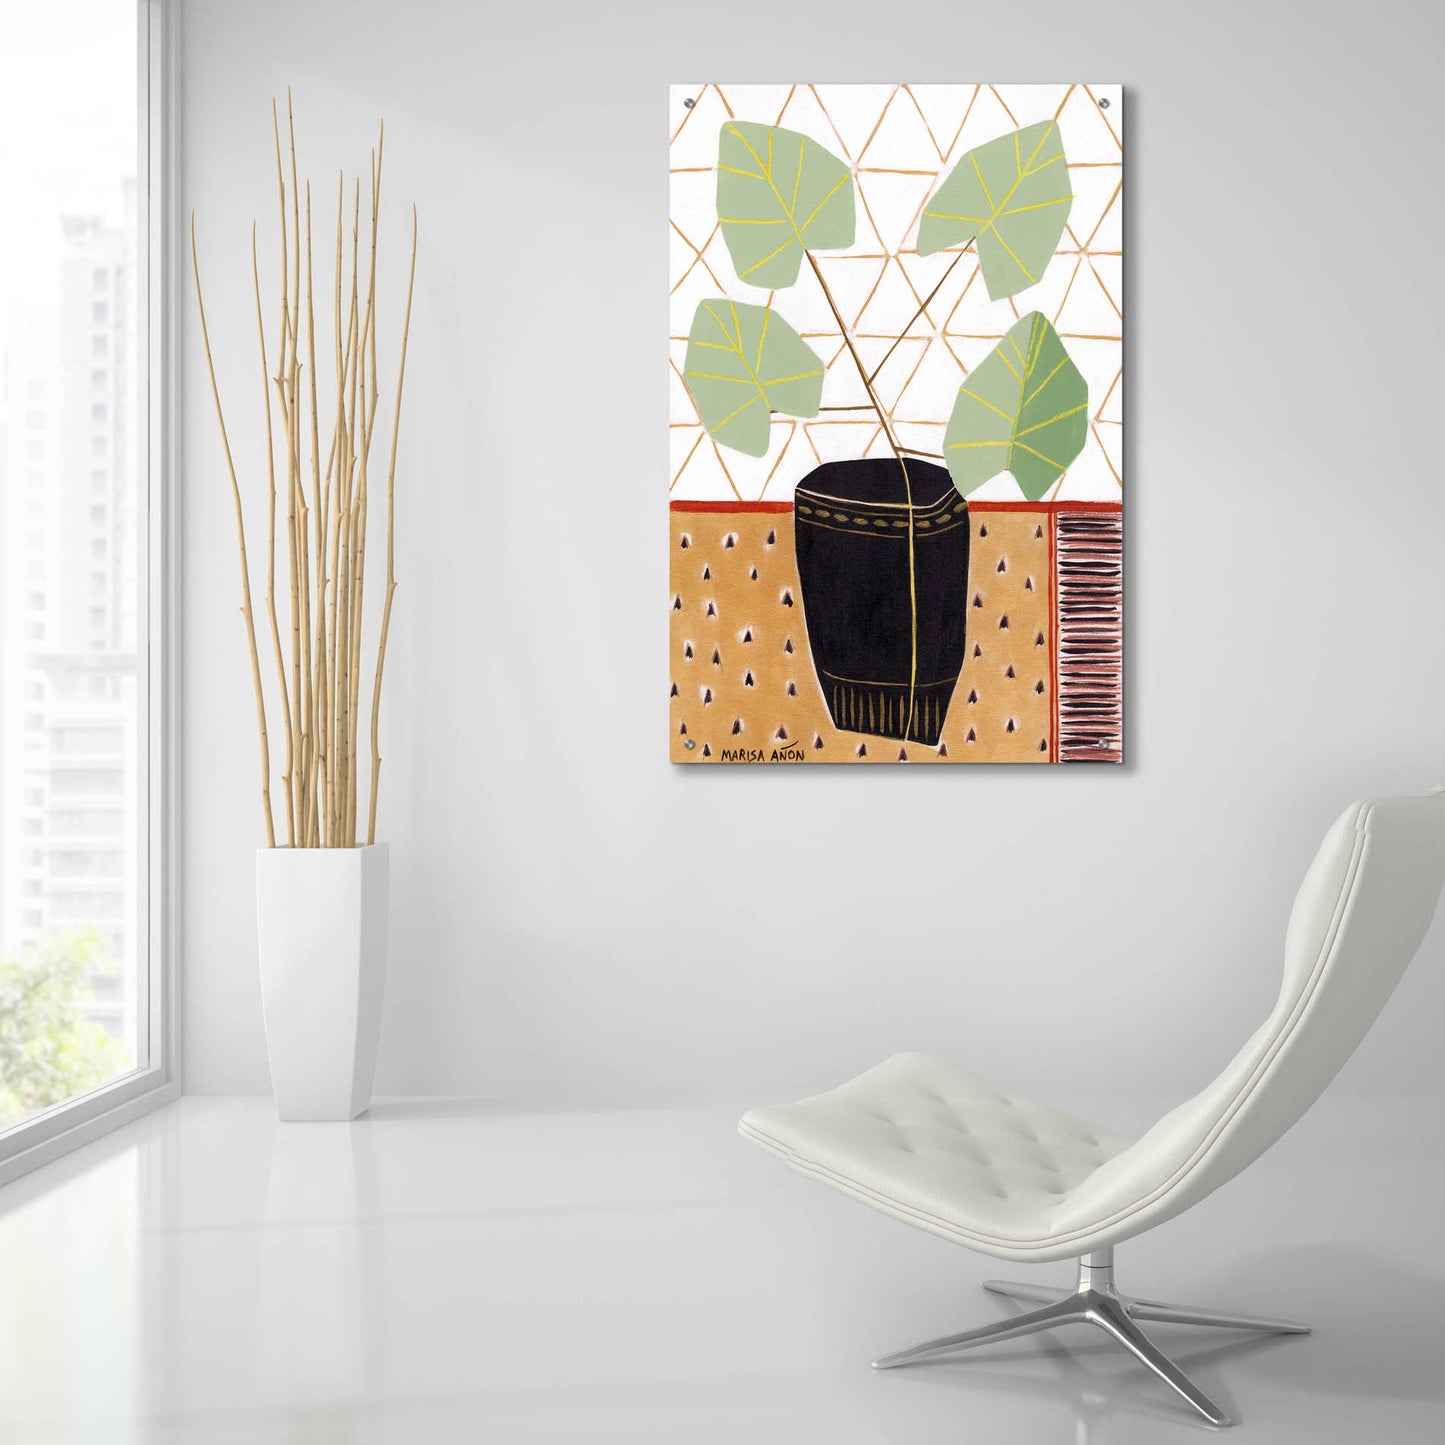 Epic Art 'Gold Tablecloth 5' by Marisa Anon, Acrylic Glass Wall Art,24x36